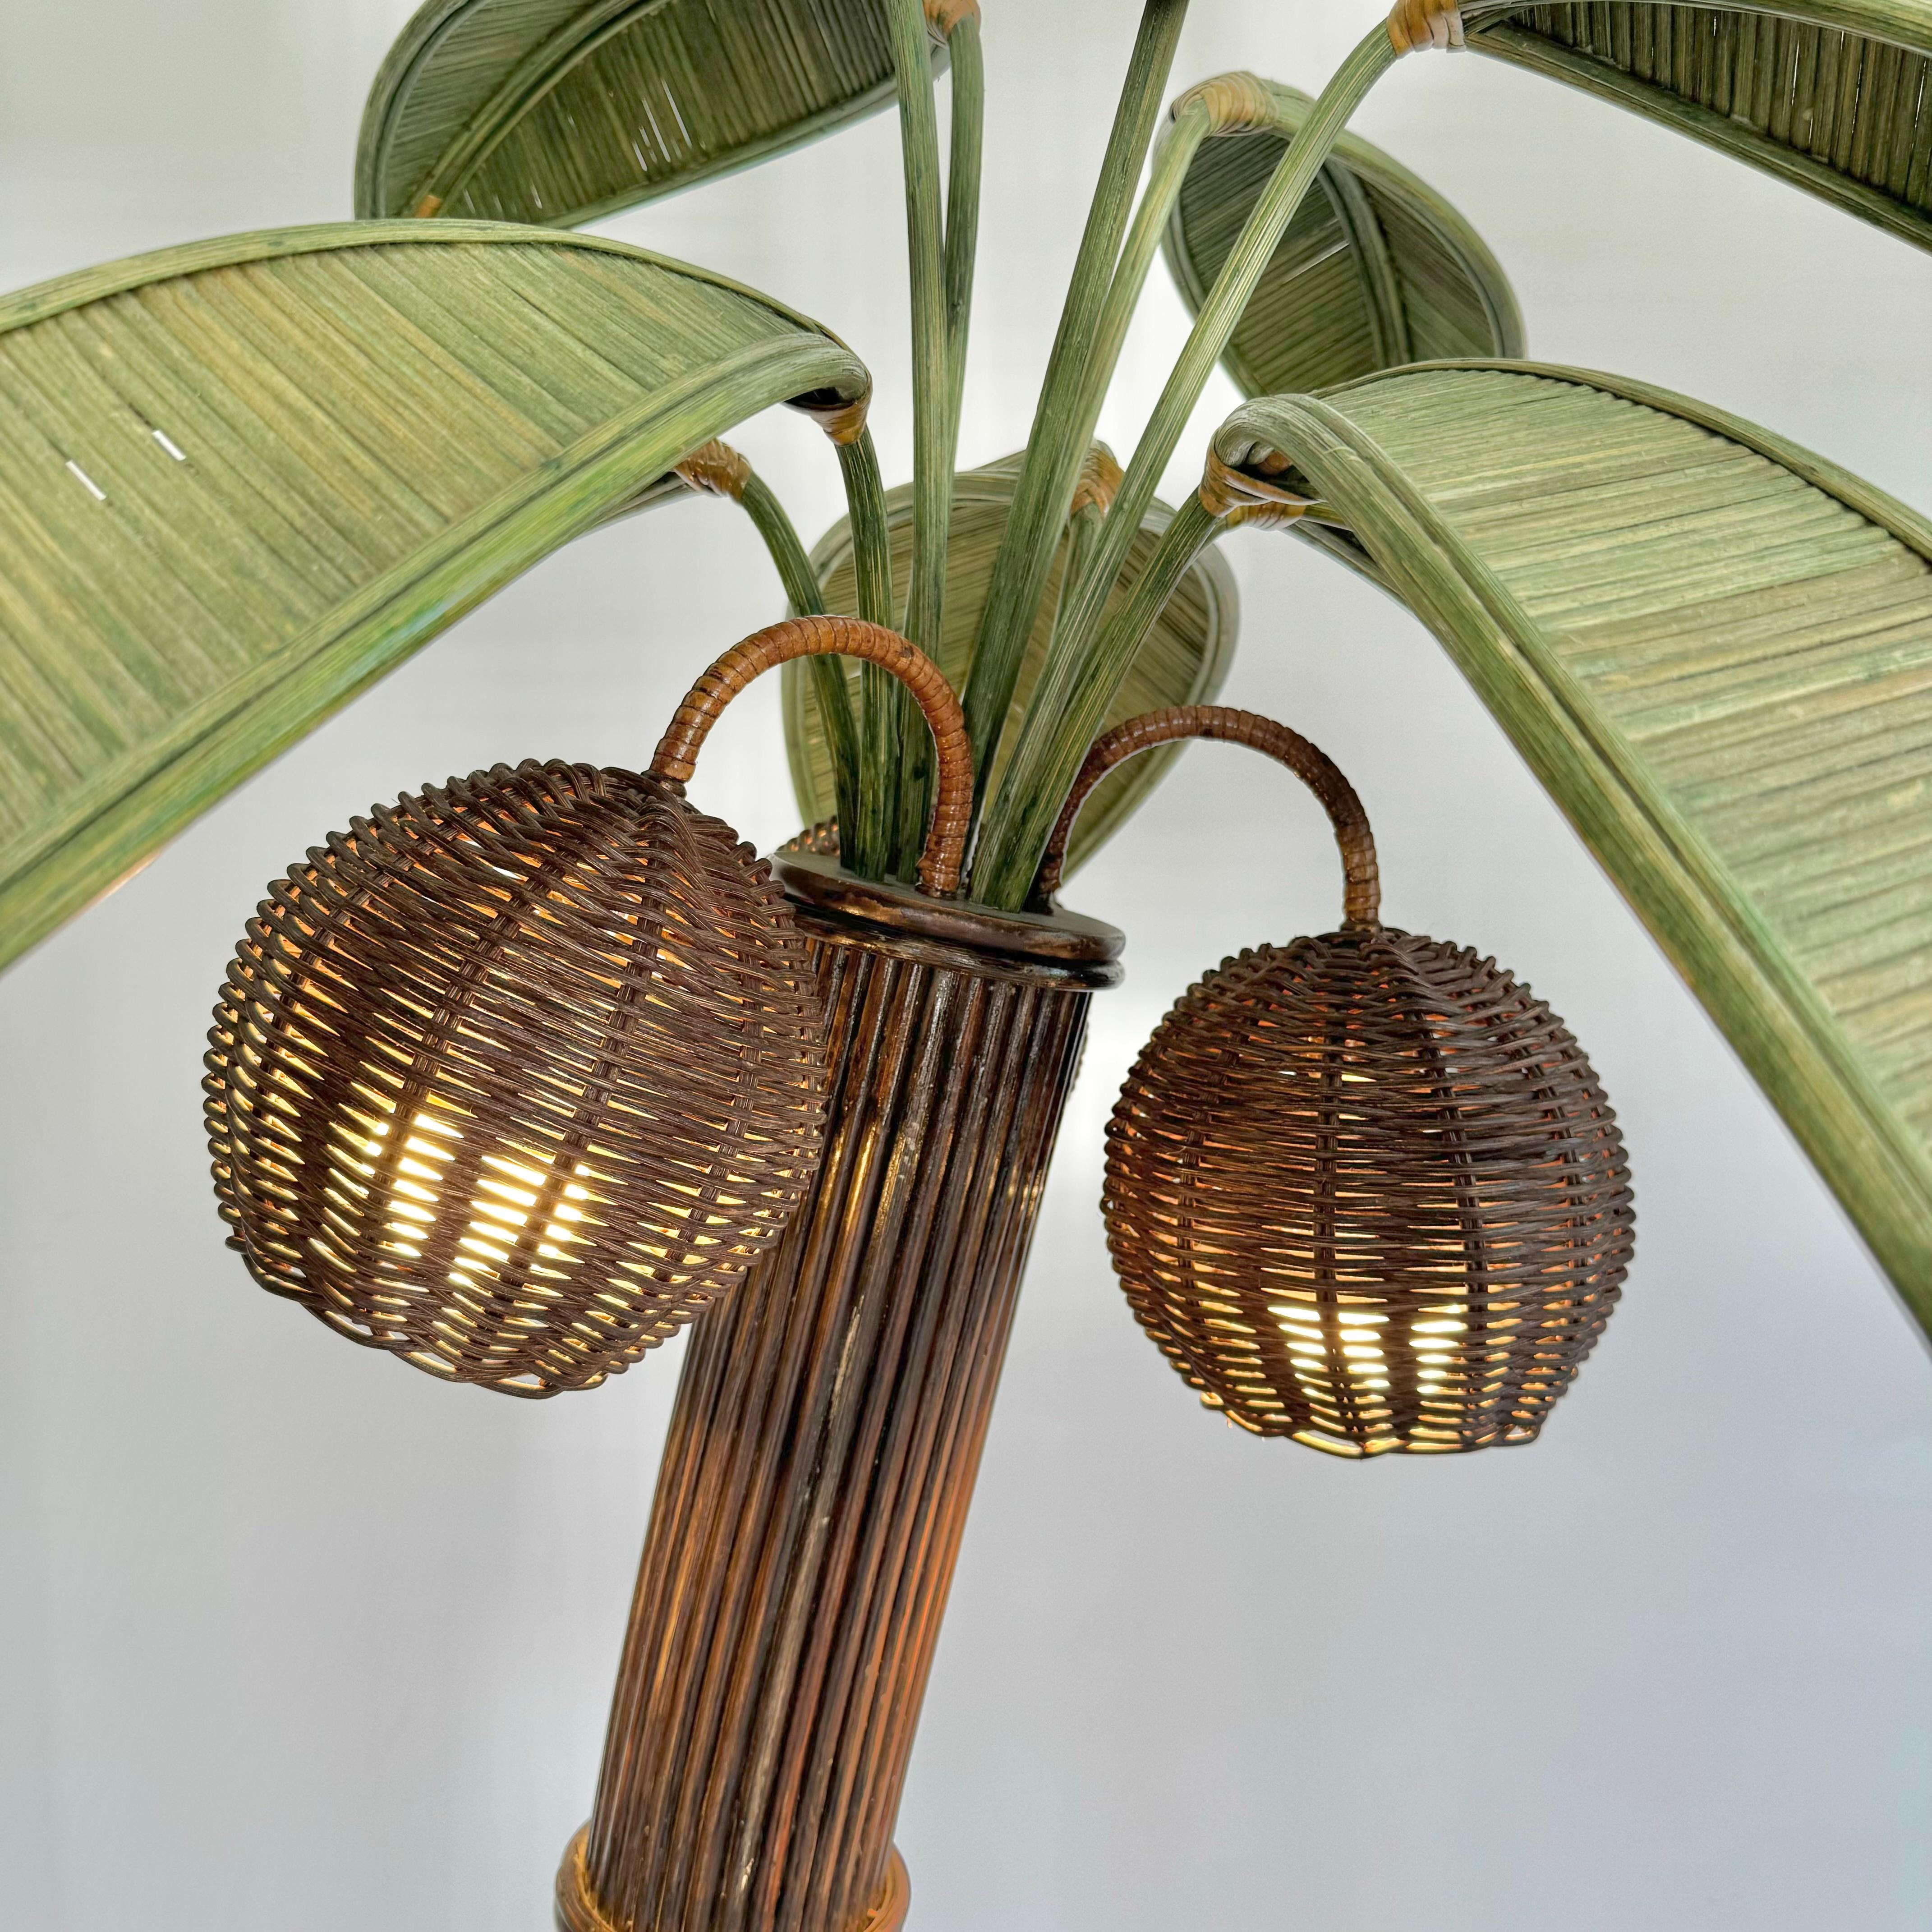 Late 20th Century Rattan and Wicker Palm Tree Floor Lamp, 1970s United States